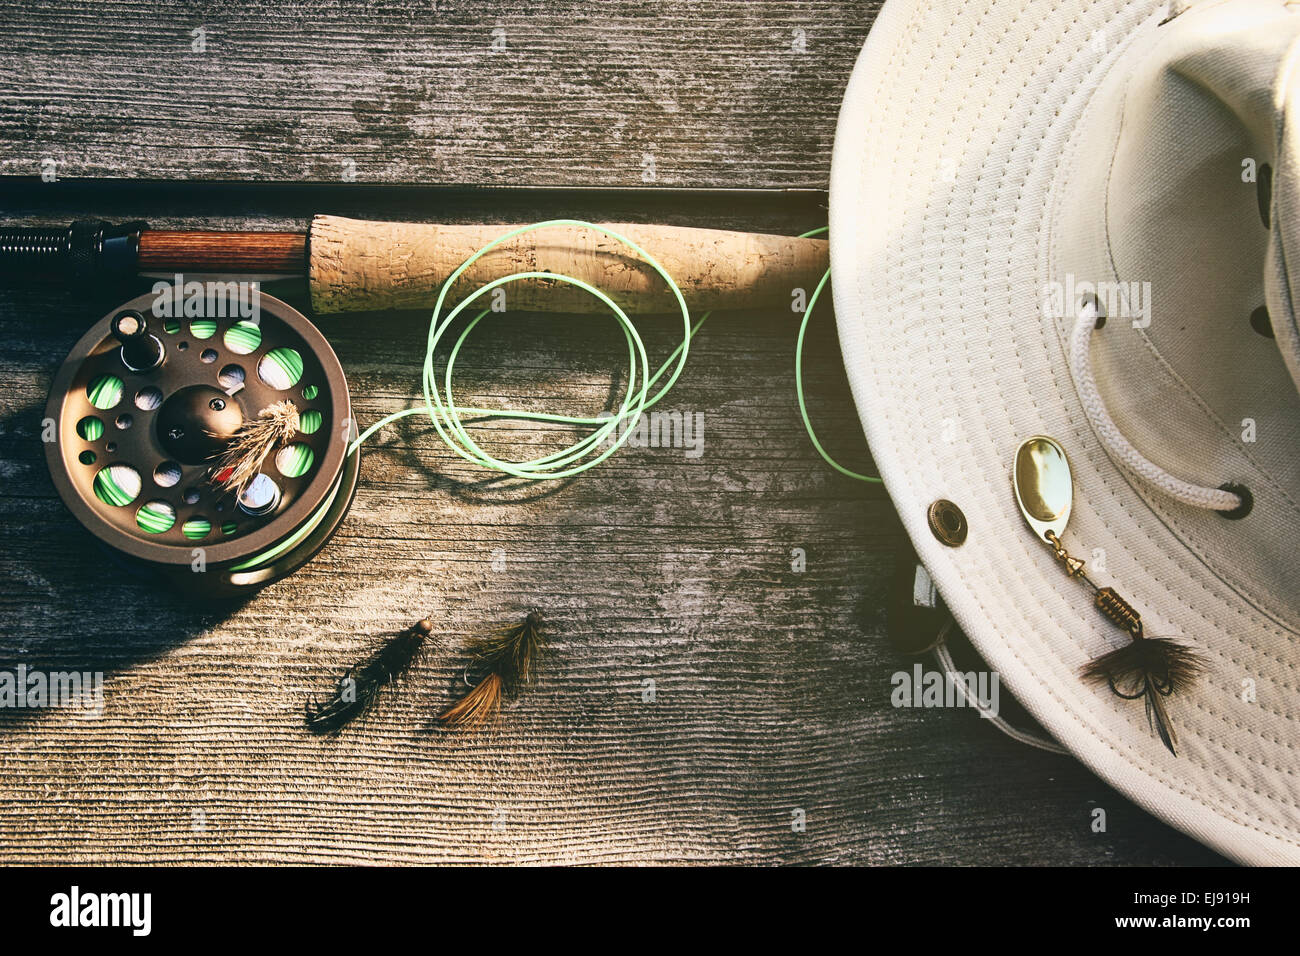 Fly fishing rod with hat on wood Stock Photo